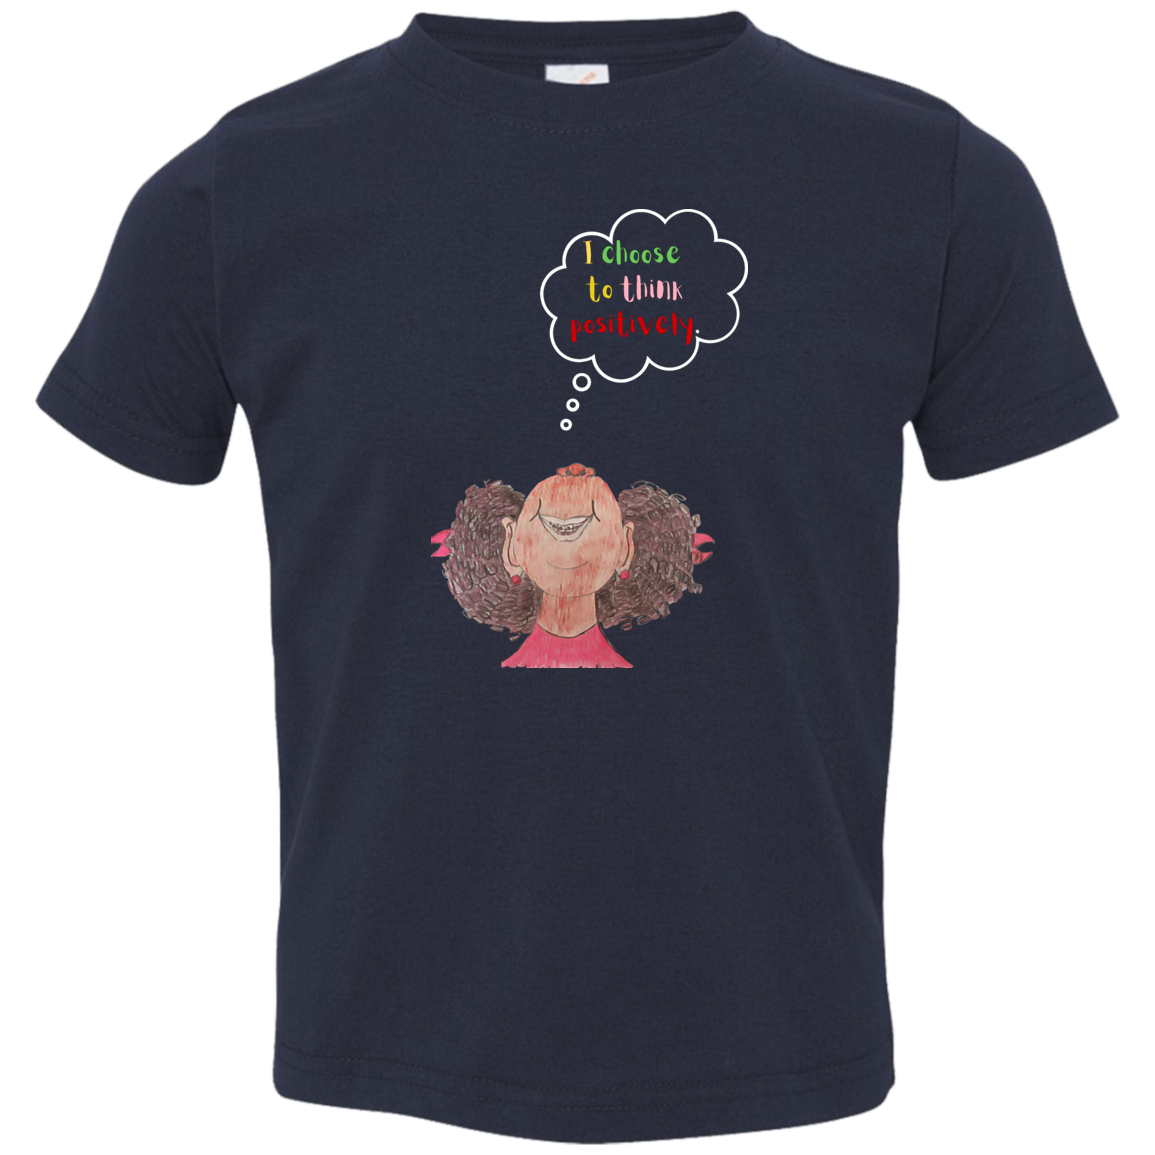 I choose to think positively Toddler Jersey T-Shirt